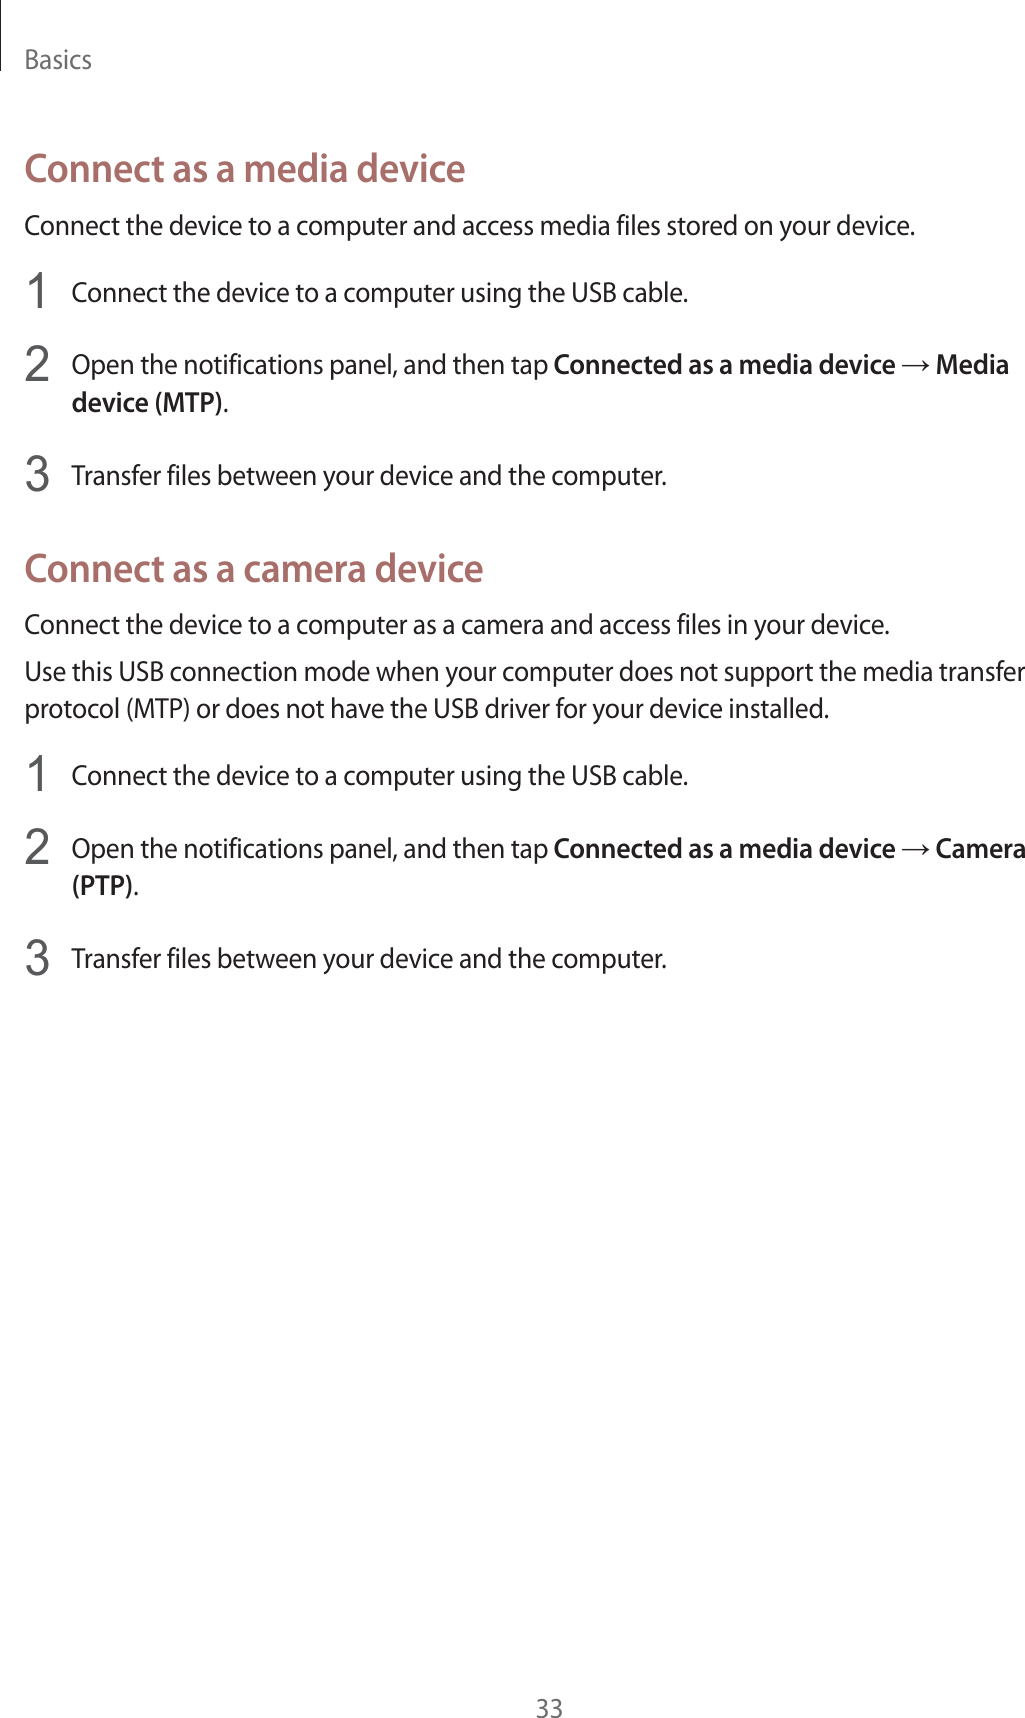 Basics33Connect as a media deviceConnect the device to a computer and access media files stored on your device.1  Connect the device to a computer using the USB cable.2  Open the notifications panel, and then tap Connected as a media device ĺ Media device (MTP).3  Transfer files between your device and the computer.Connect as a camera deviceConnect the device to a computer as a camera and access files in your device.Use this USB connection mode when your computer does not support the media transfer protocol (MTP) or does not have the USB driver for your device installed.1  Connect the device to a computer using the USB cable.2  Open the notifications panel, and then tap Connected as a media device ĺ Camera (PTP).3  Transfer files between your device and the computer.